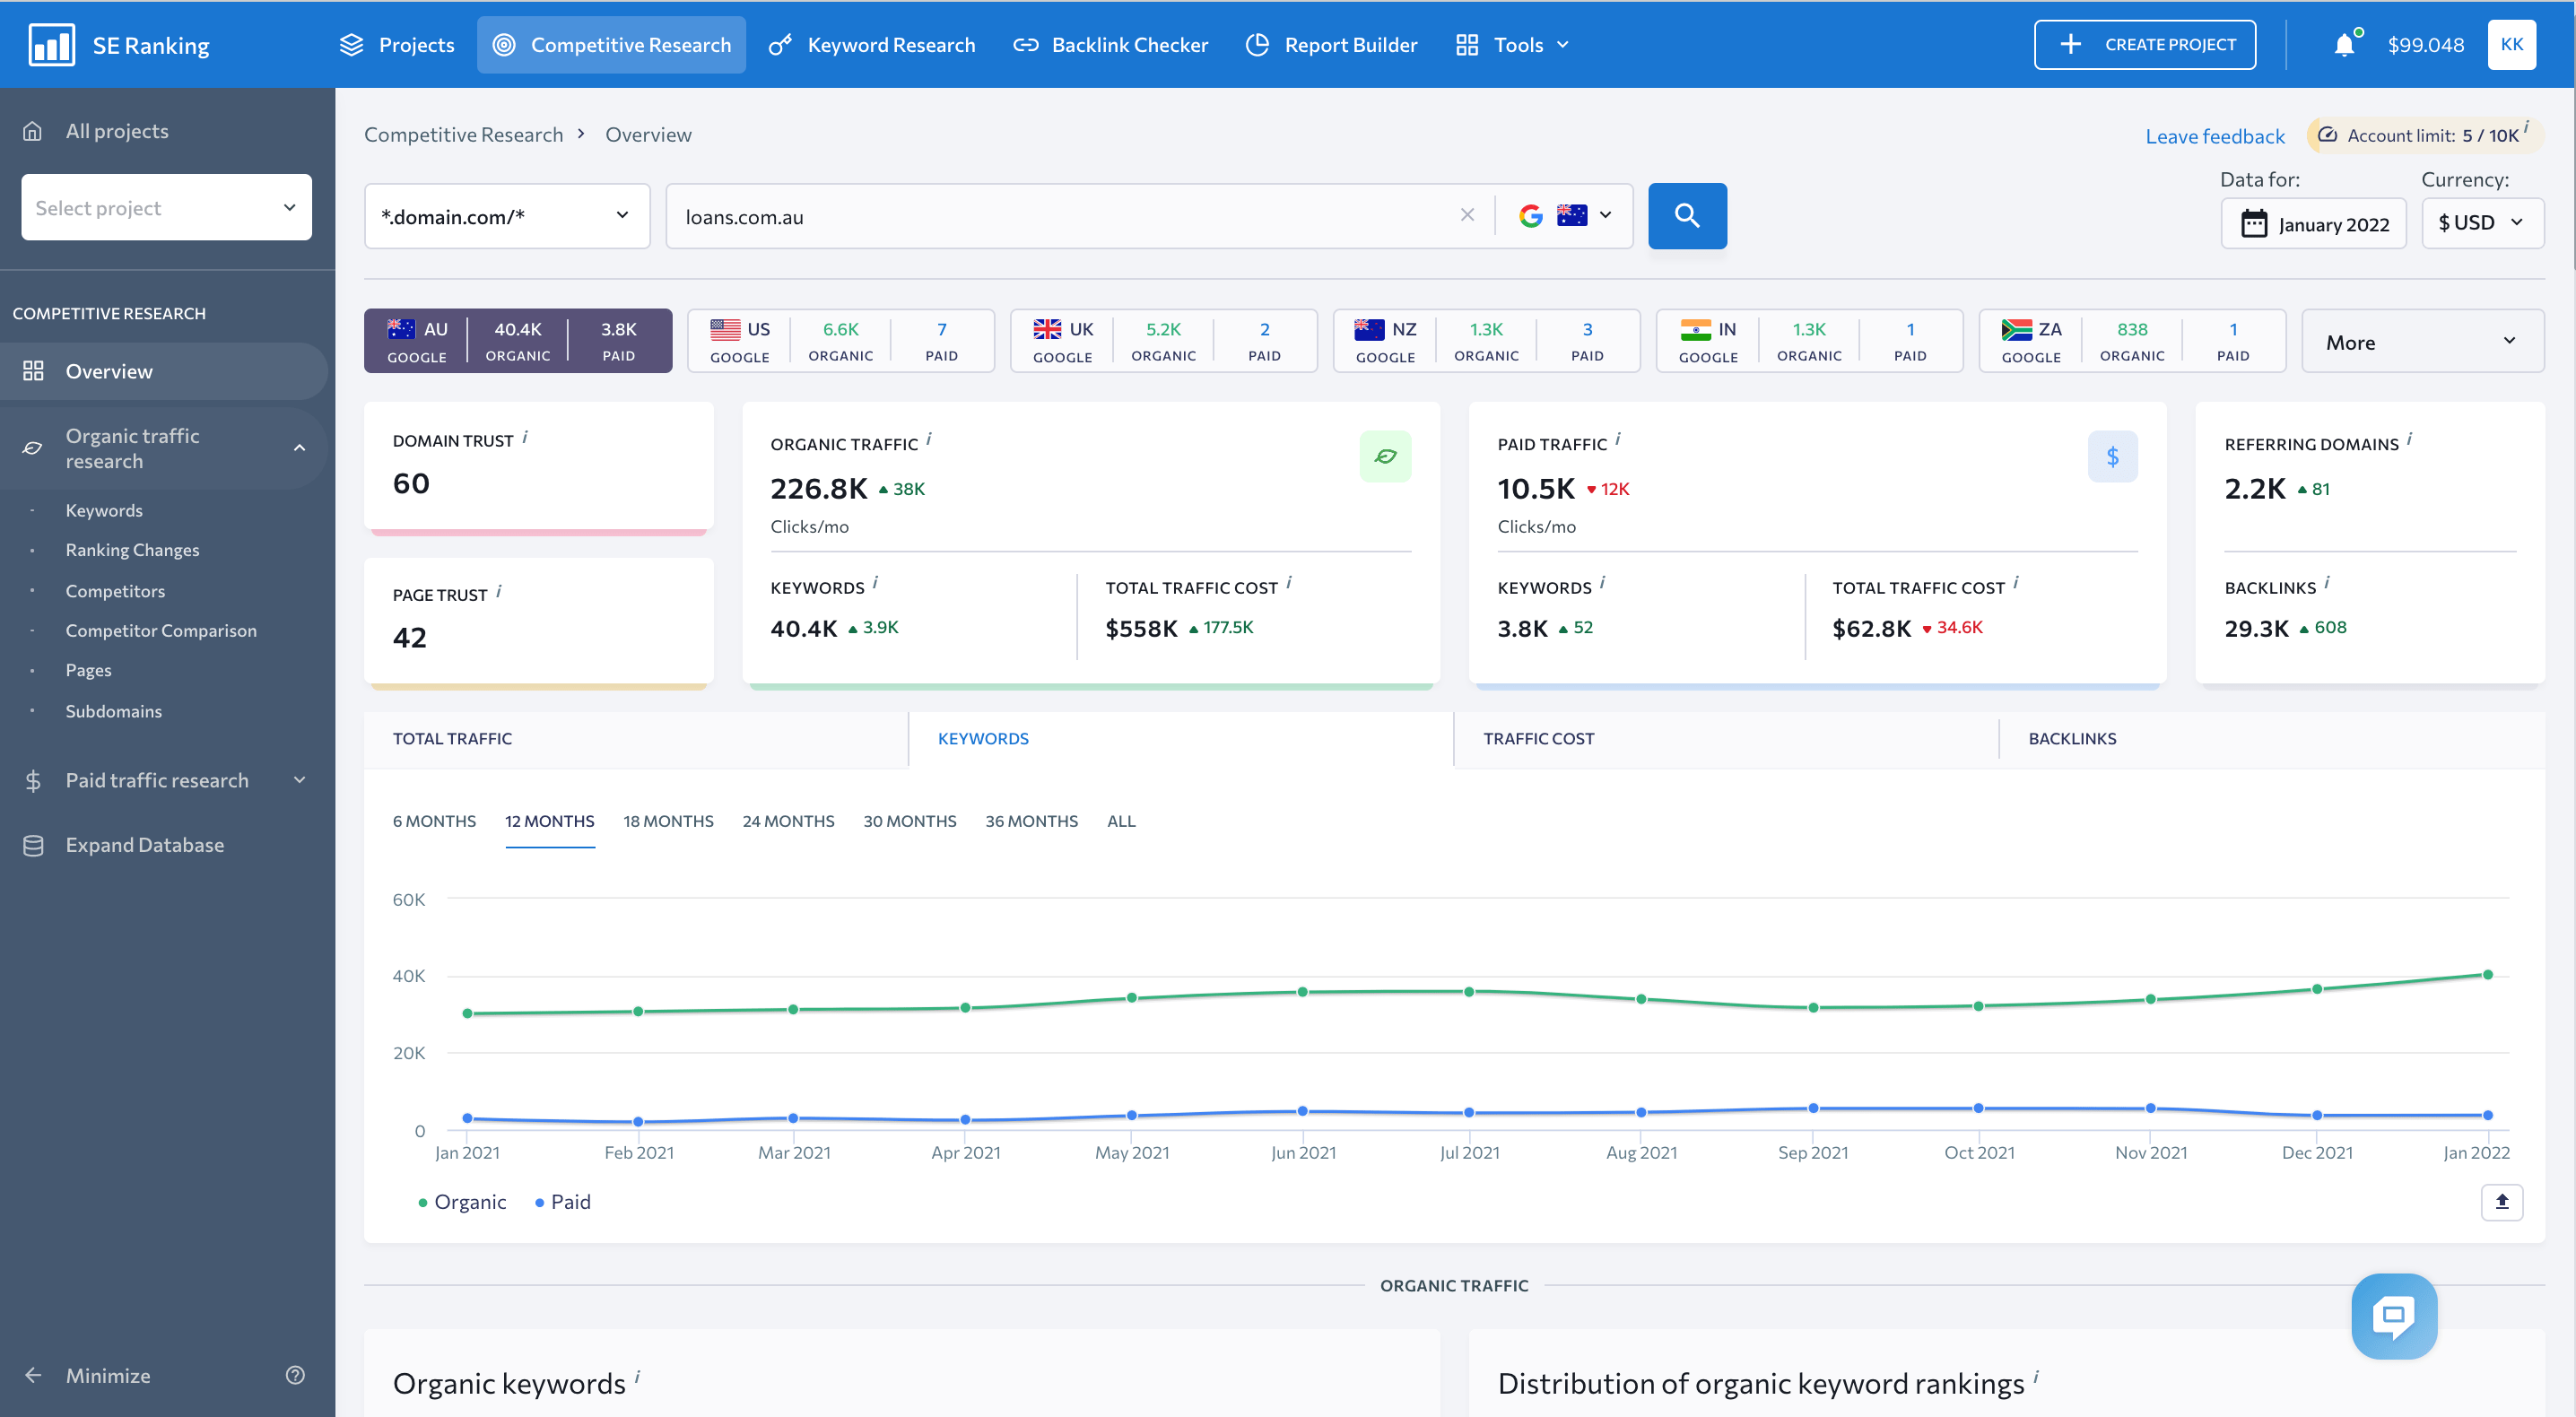 The Overview dashboard in the Competitive Research tool